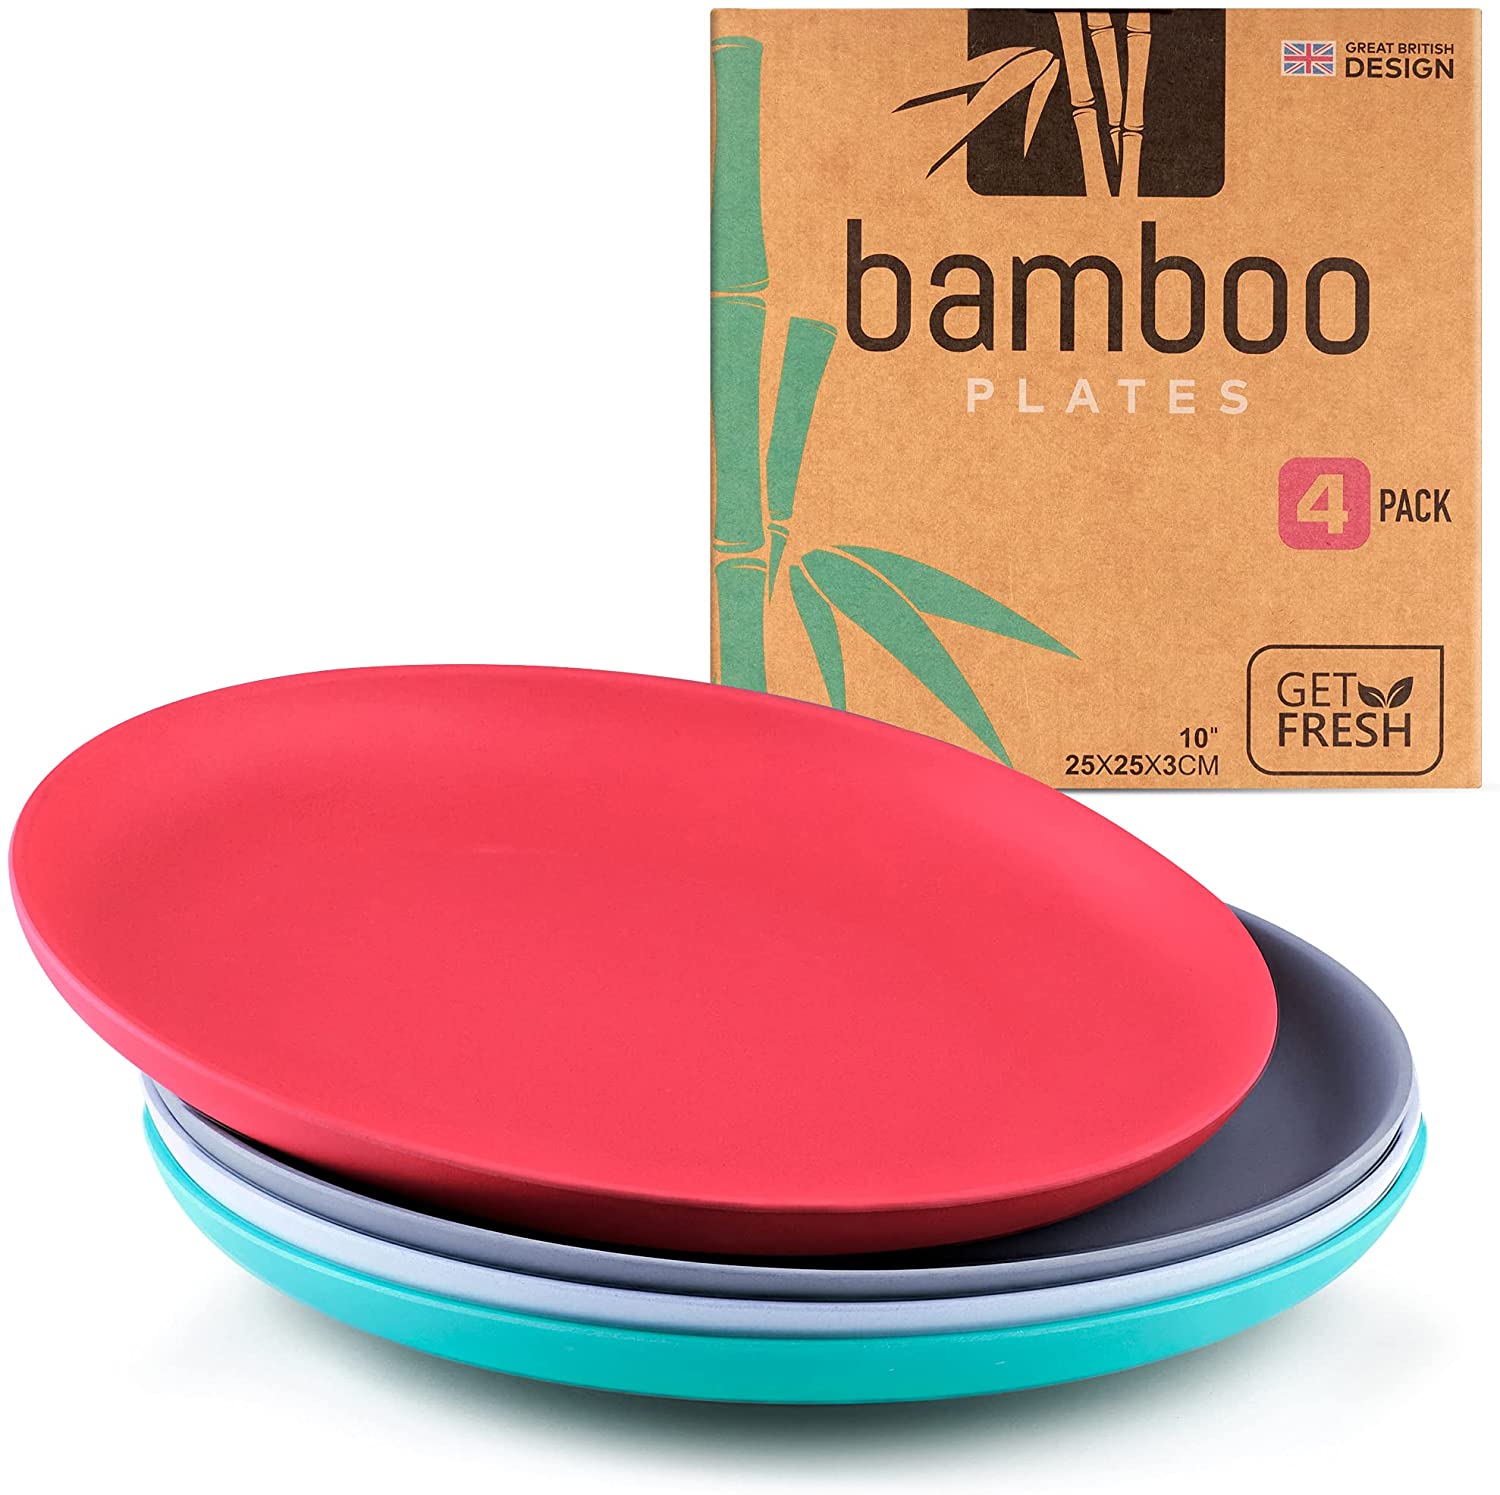 Adult-sized bamboo plates